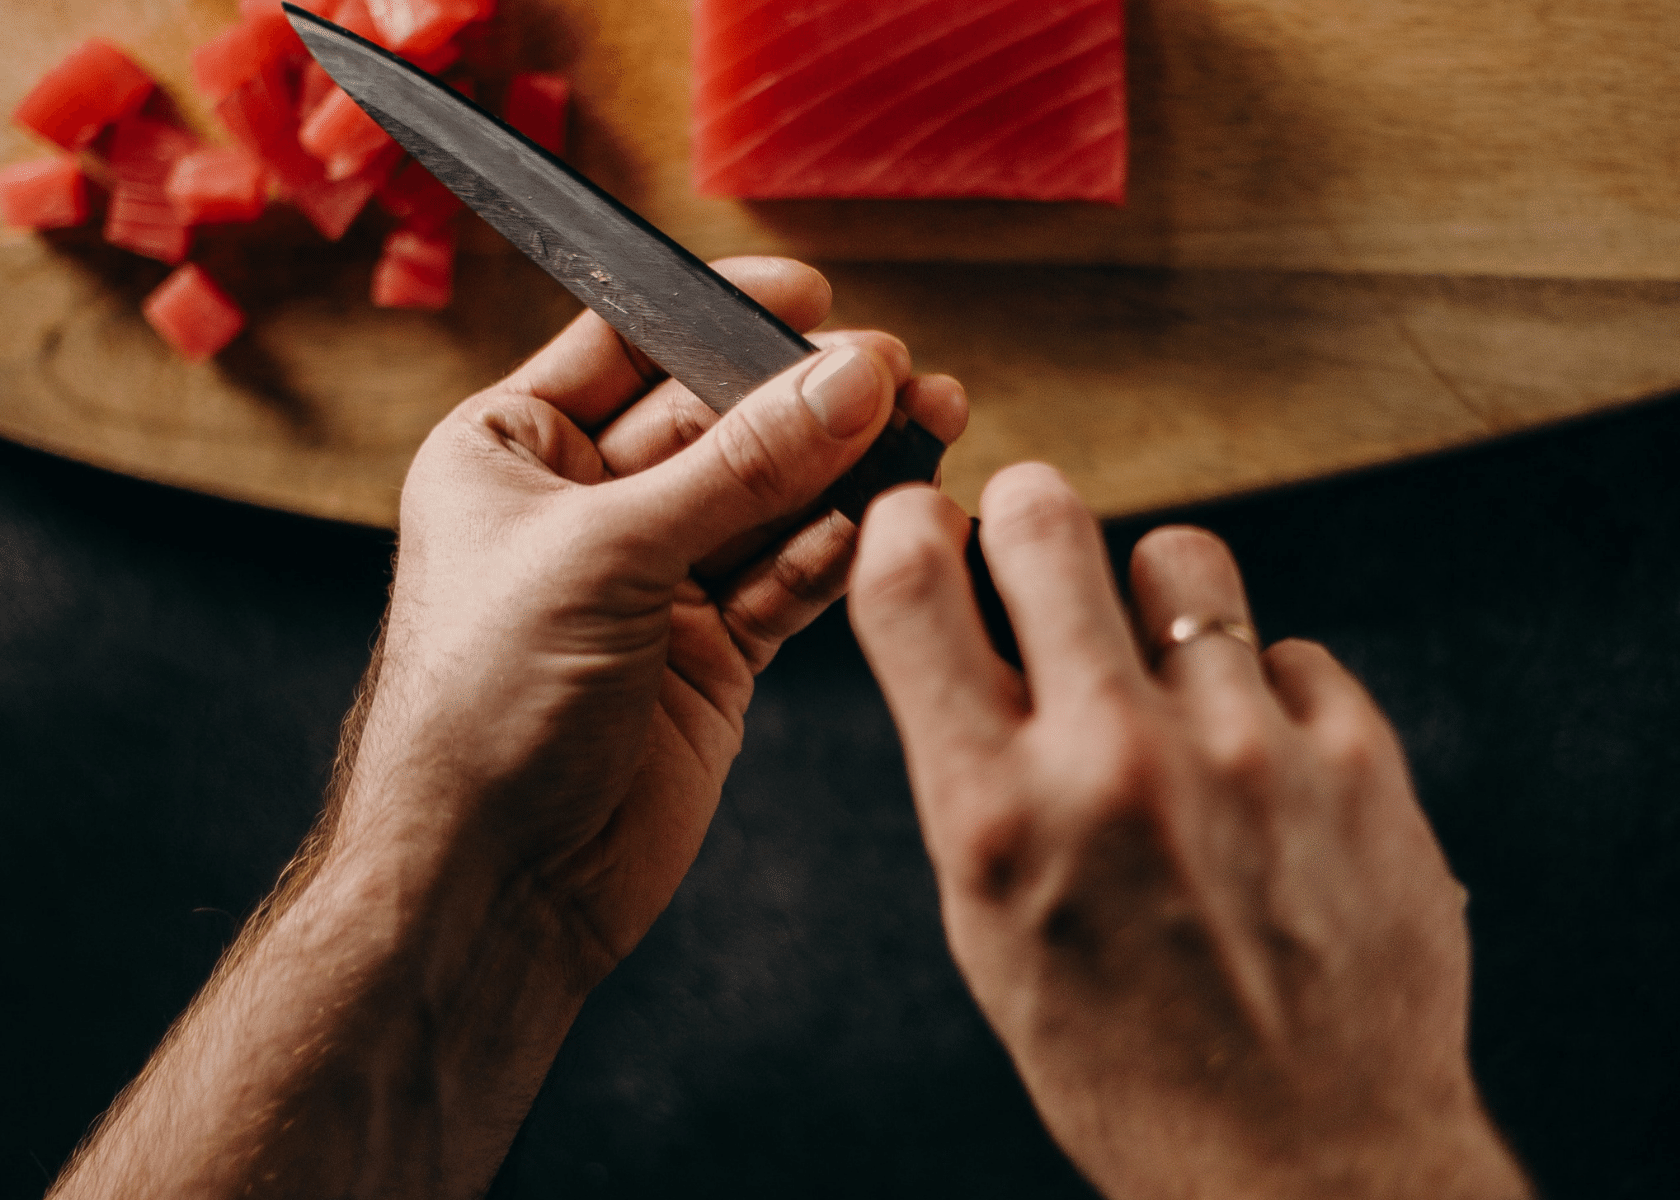 A man wiping a chefs knife with his fingers looking over some freshly cut fish.